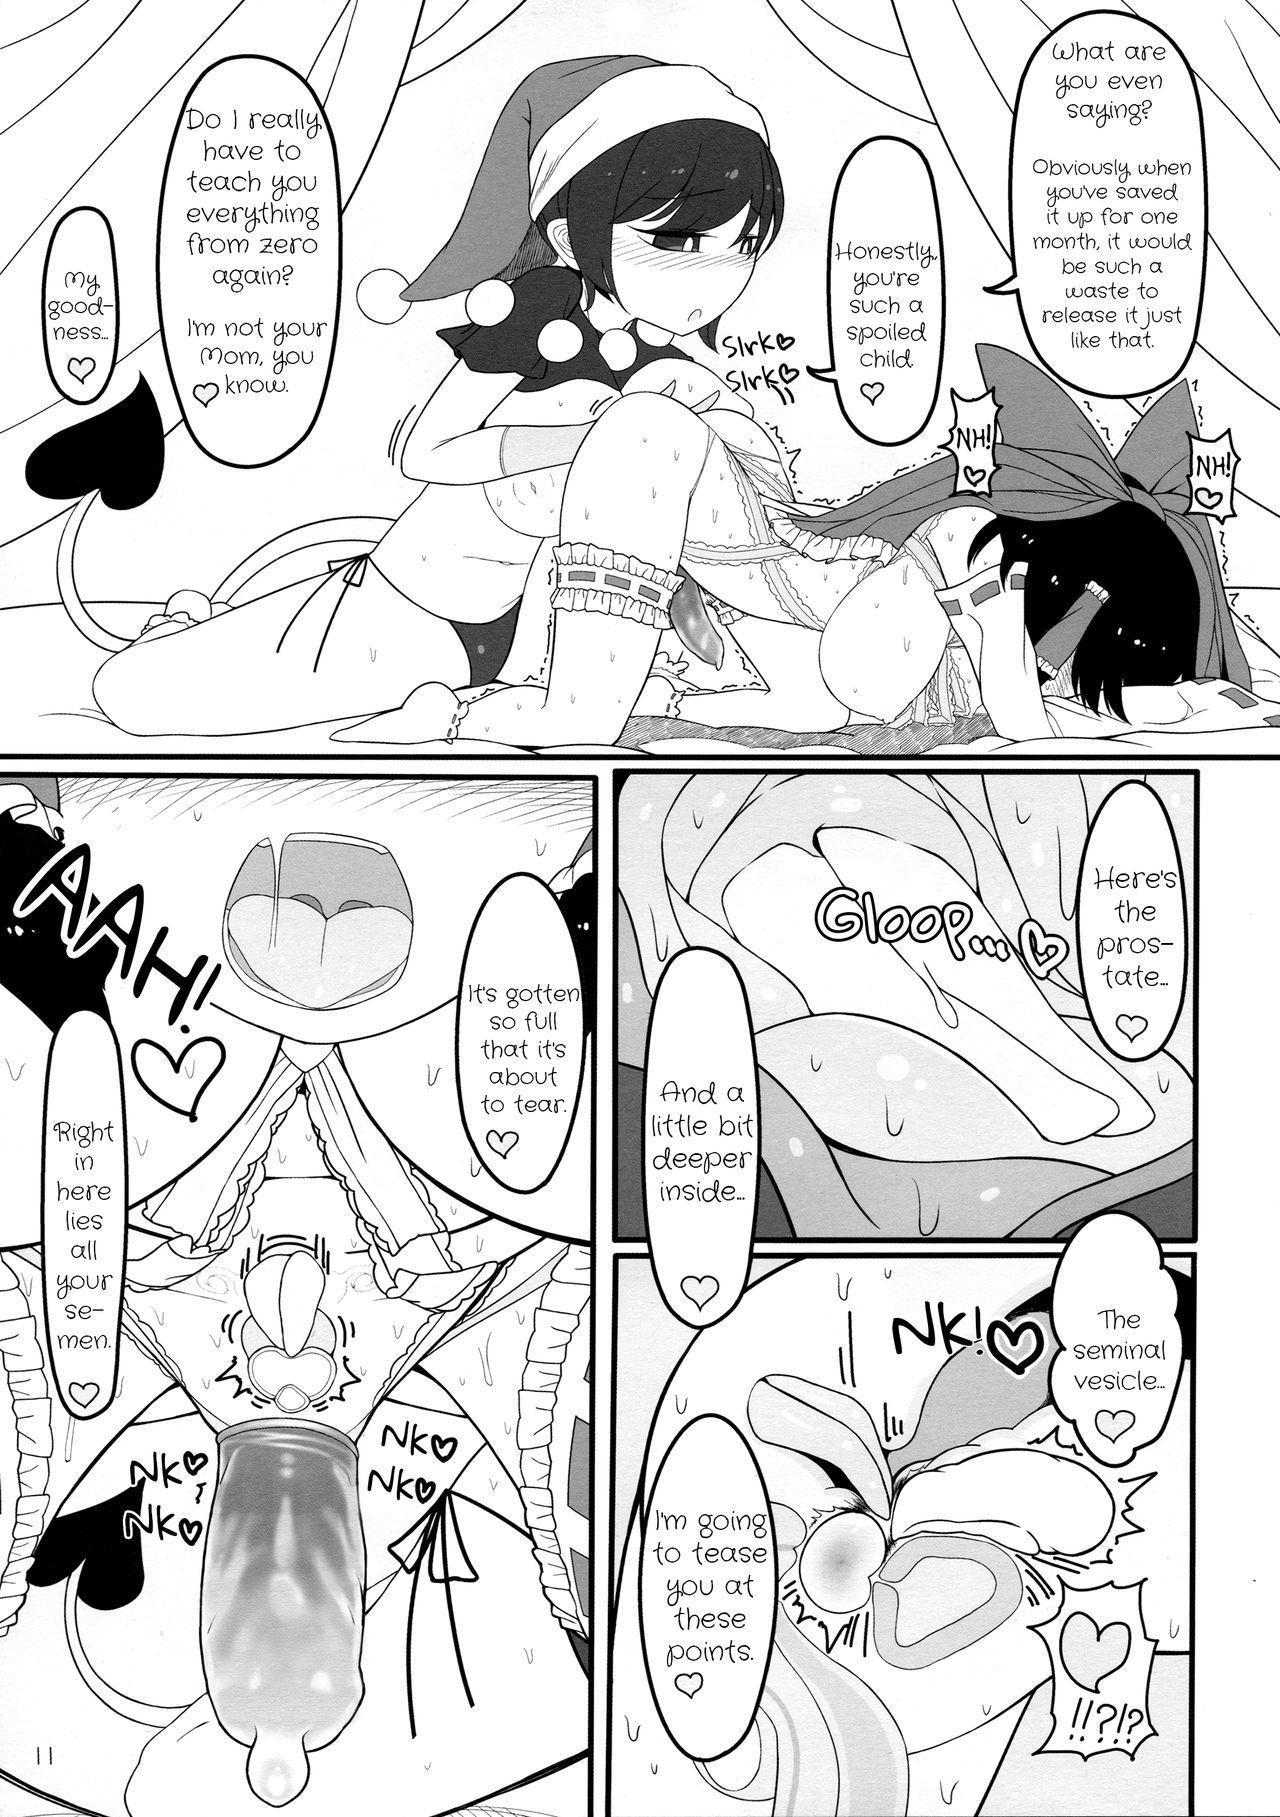 Gay Theresome Dreams dreams - Touhou project Girl Sucking Dick - Page 10